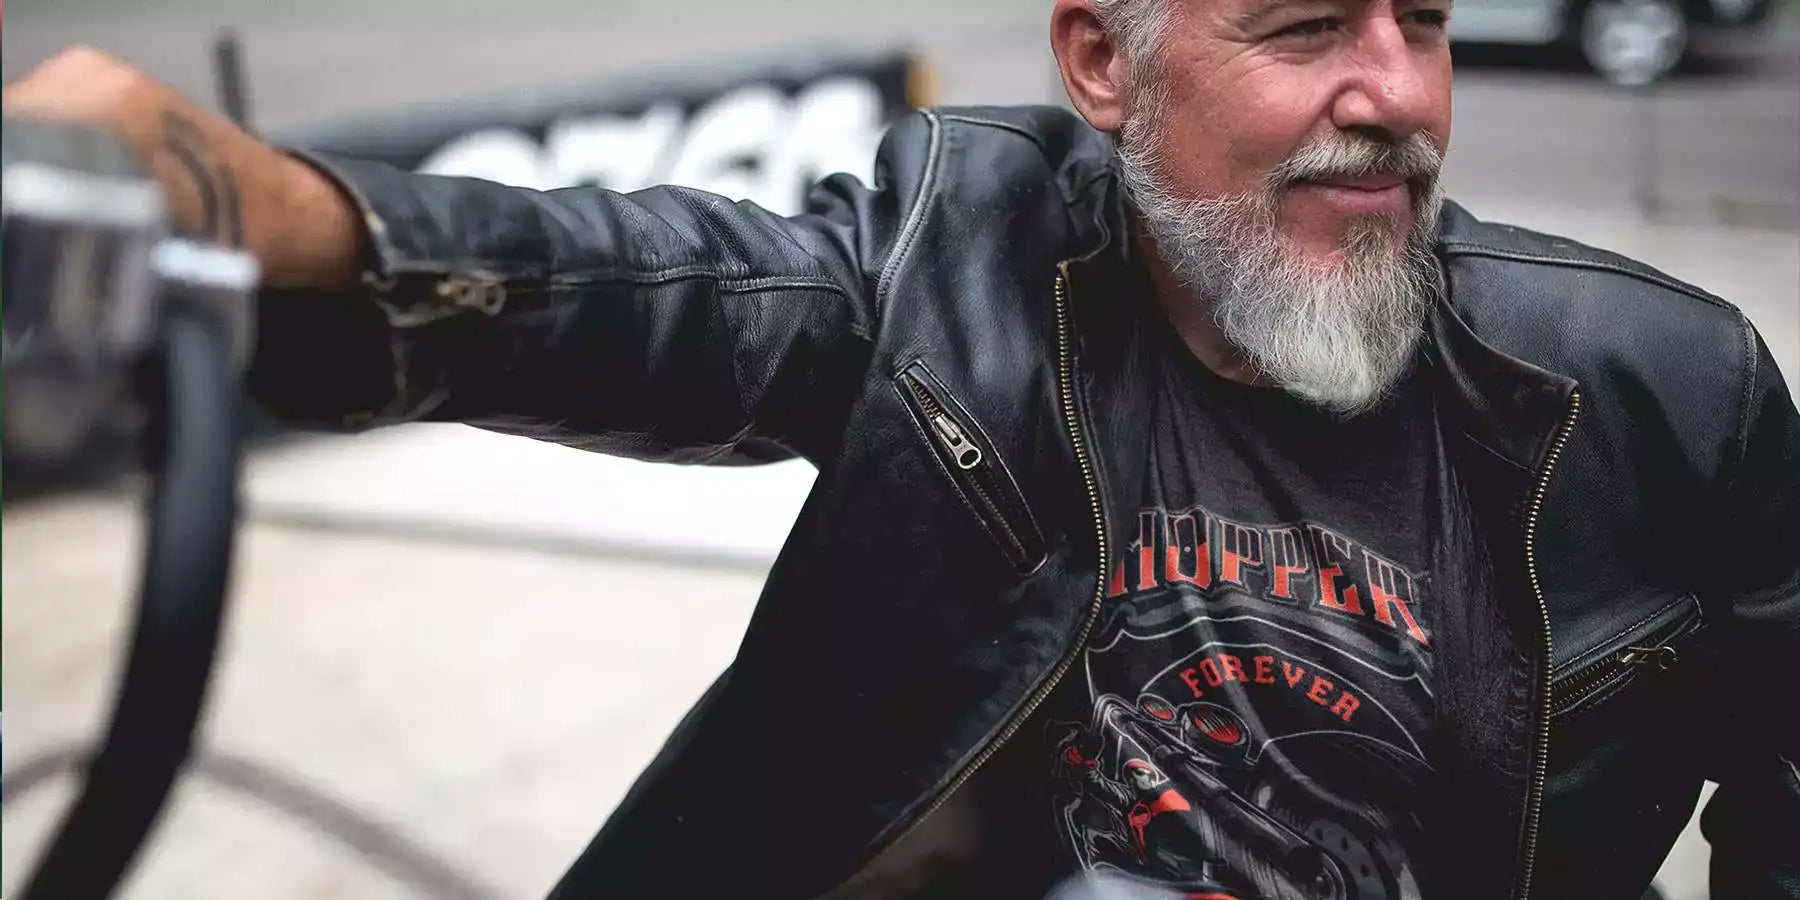 Old man sitting on a motorcycle, wearing a black leather jacket and printed black t-shirt. The t-shirt design is a motorcycle with text - Chopper forever